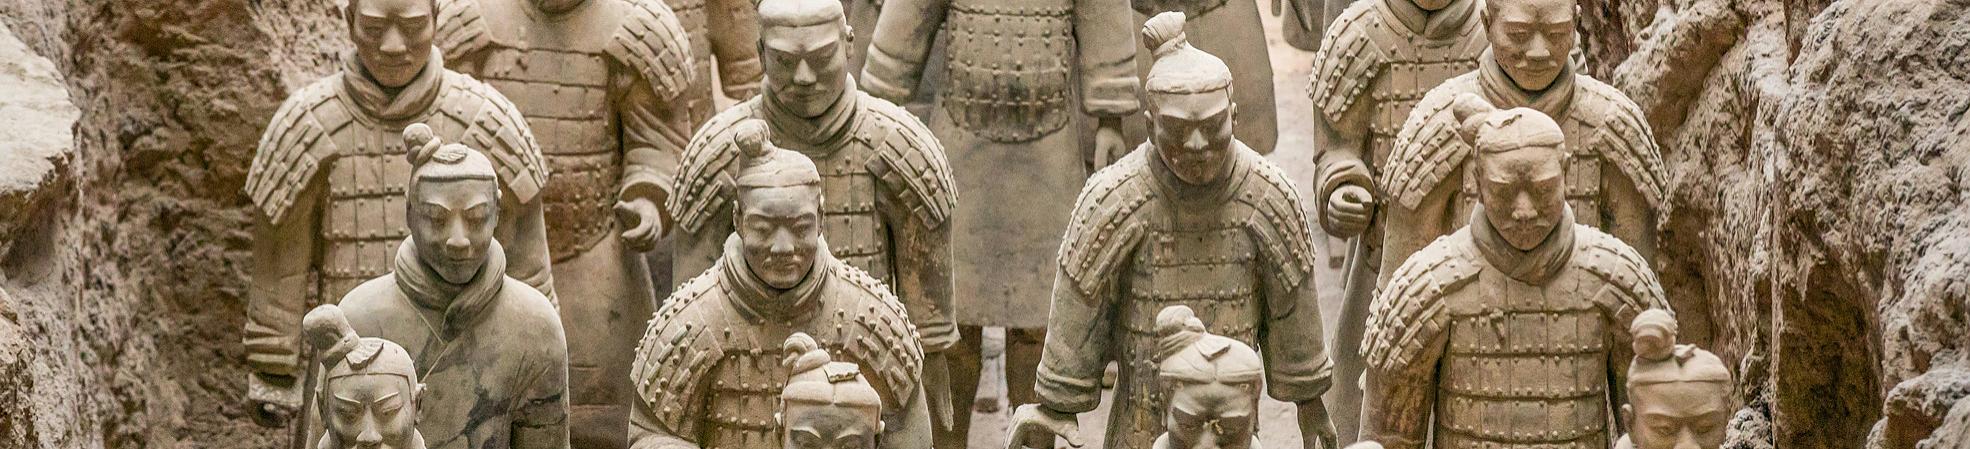 Ancient Xi'an in Tang Dynasty